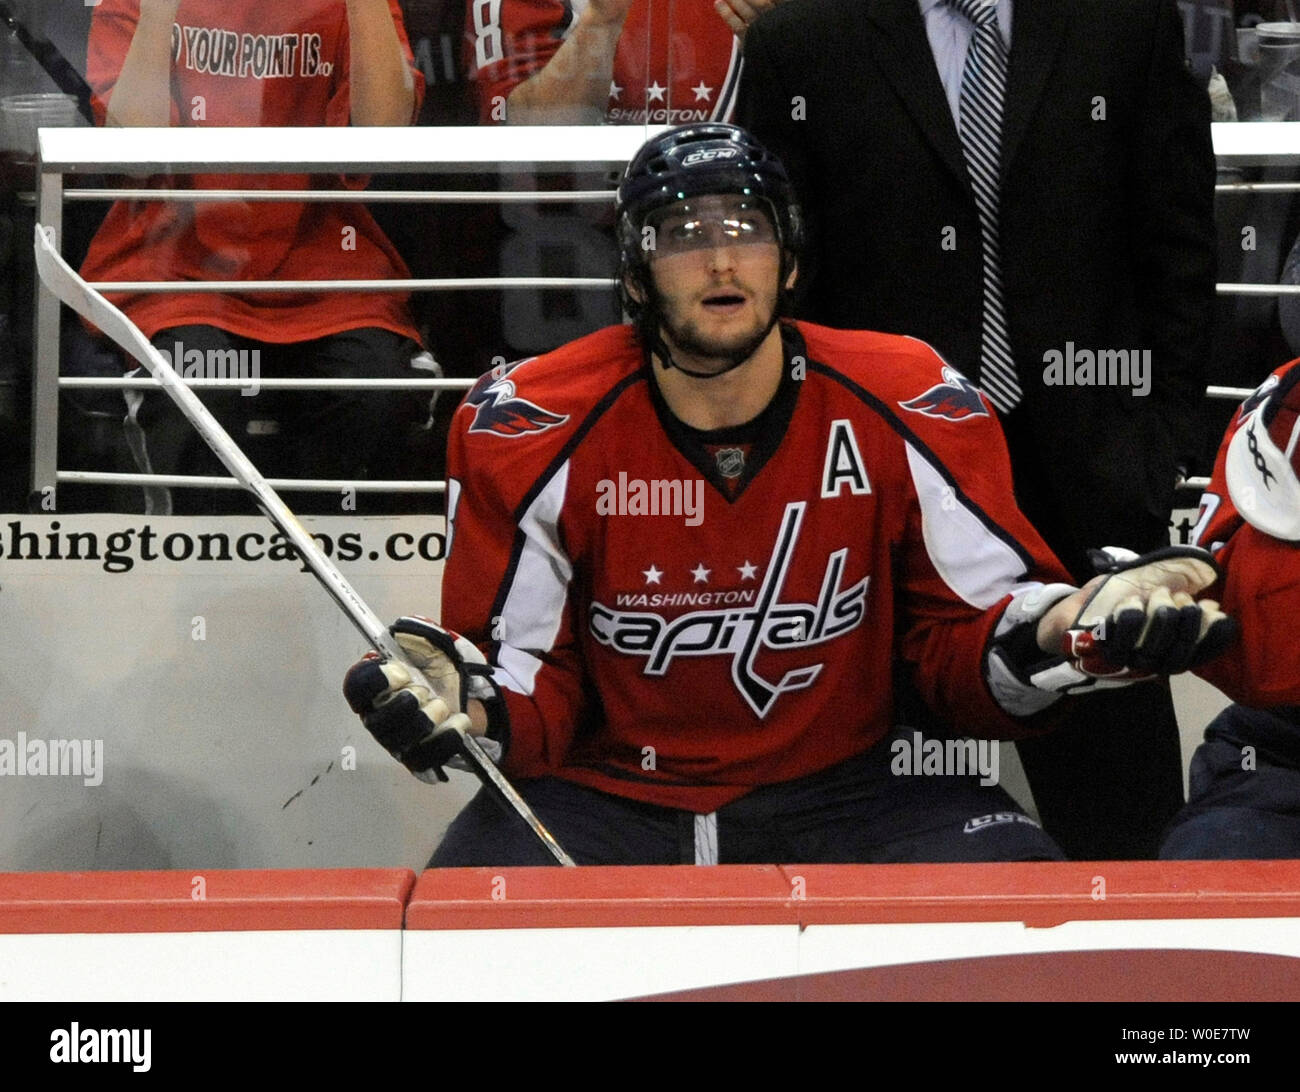 FILE - In this Sept. 1, 2005, file photo, Alexander Ovechkin, 19